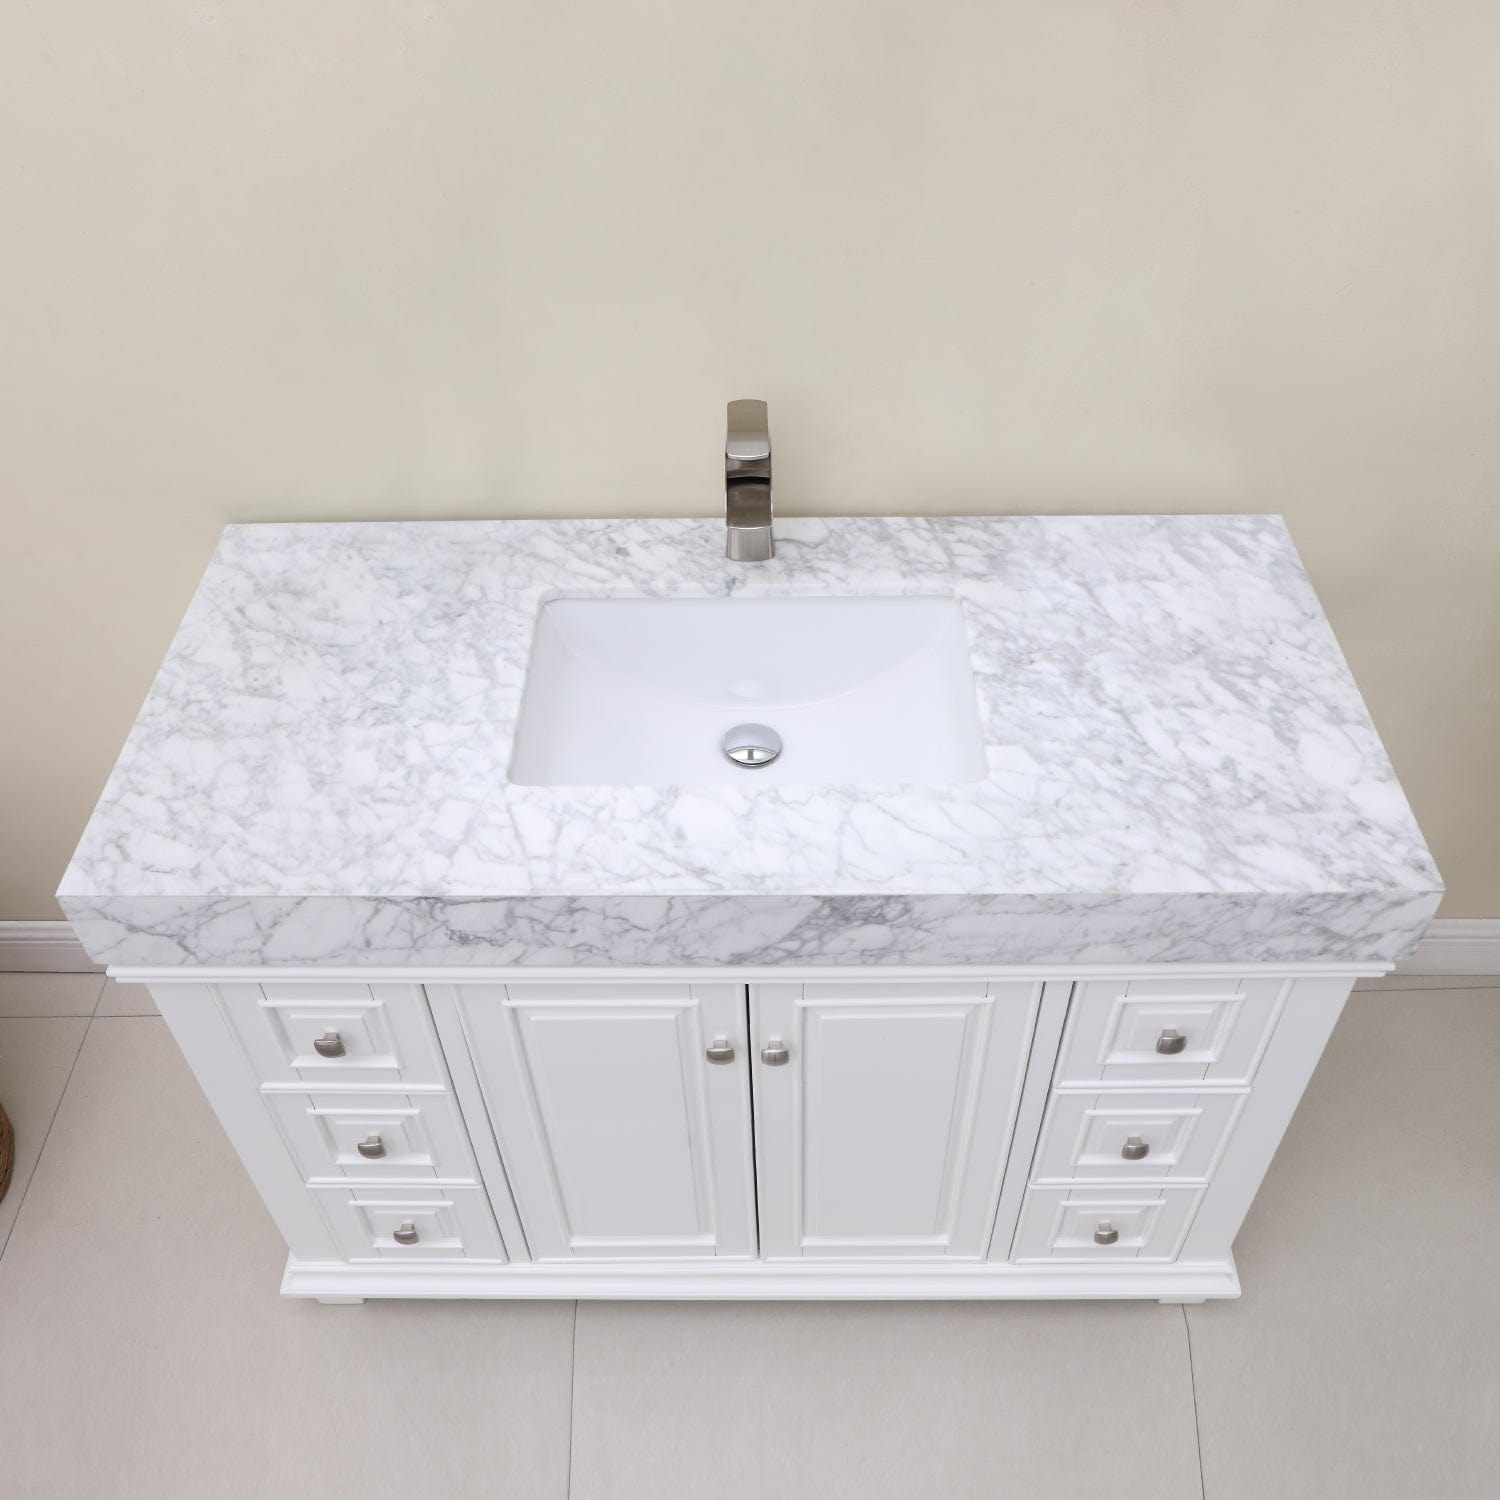 Altair Jardin 48" Single Bathroom Vanity Set in White and Carrara White Marble Countertop without Mirror 539048-WH-CA-NM - Molaix631112971027Vanity539048-WH-CA-NM